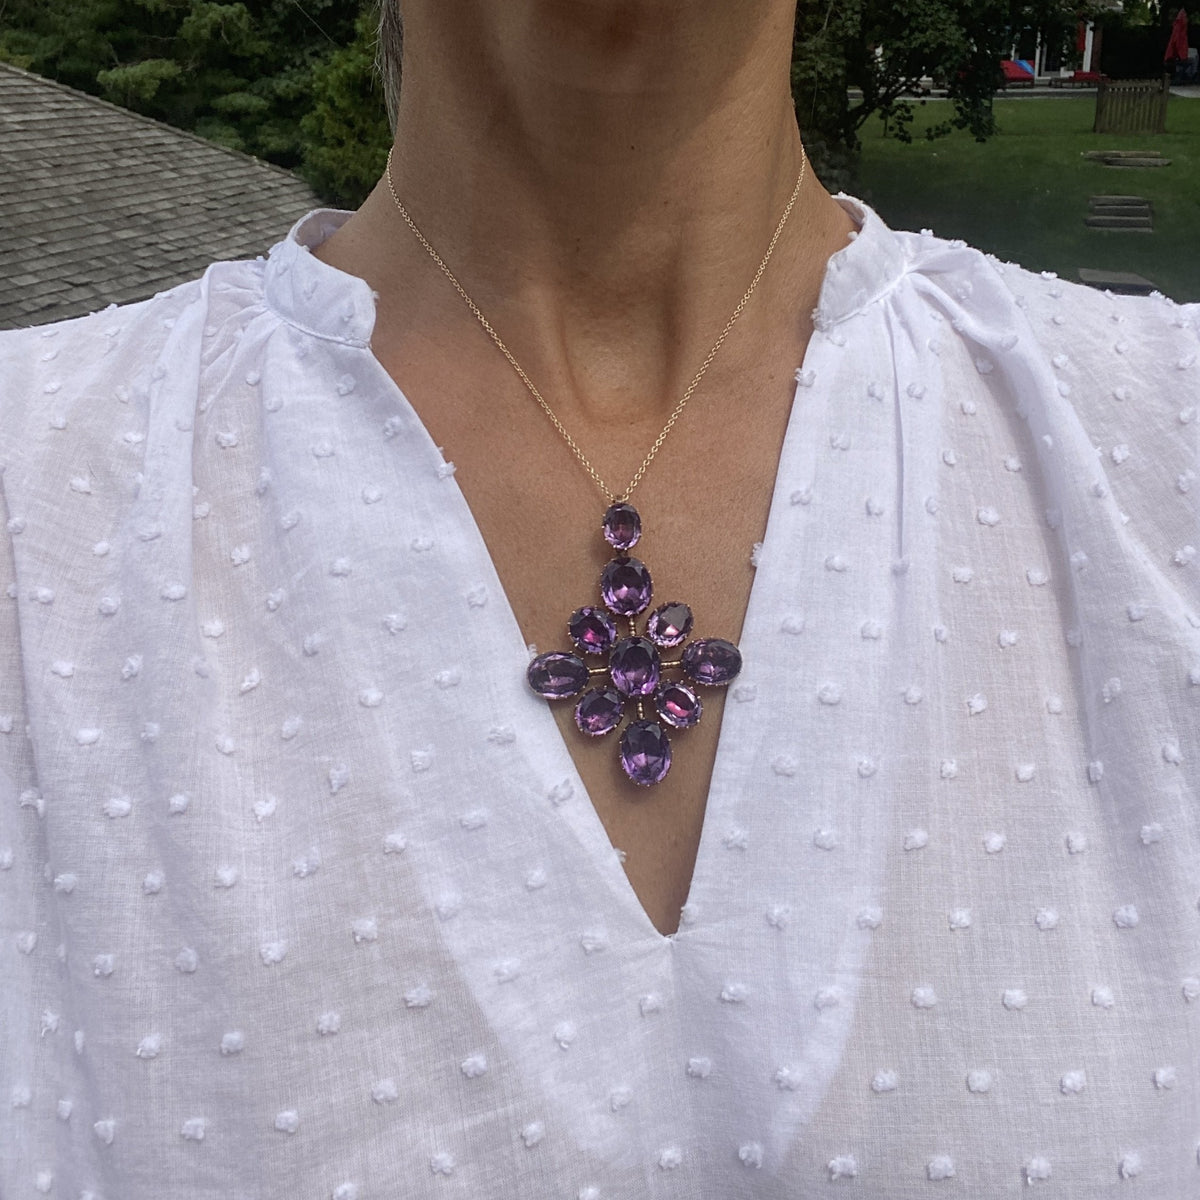 Victorian Amethyst Pendant Necklace sold by Doyle & Doyle an antique and vintage jewelry boutique.